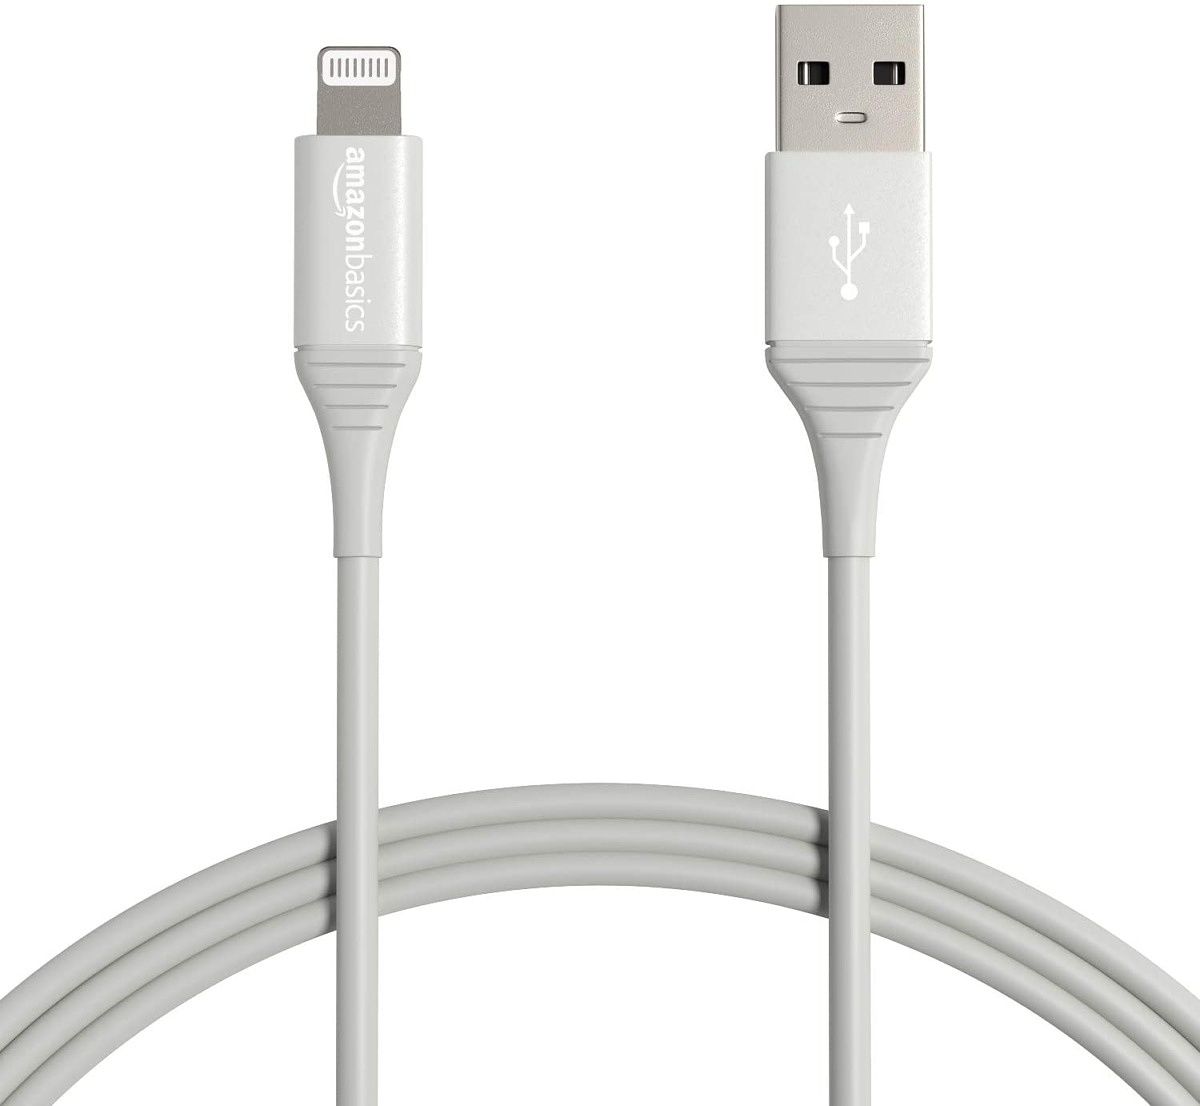 This 6-foot USB Type-A to Lightning cable should last you much longer than the cord Apple includes with its products. Amazon Prime subscribers get free shipping.